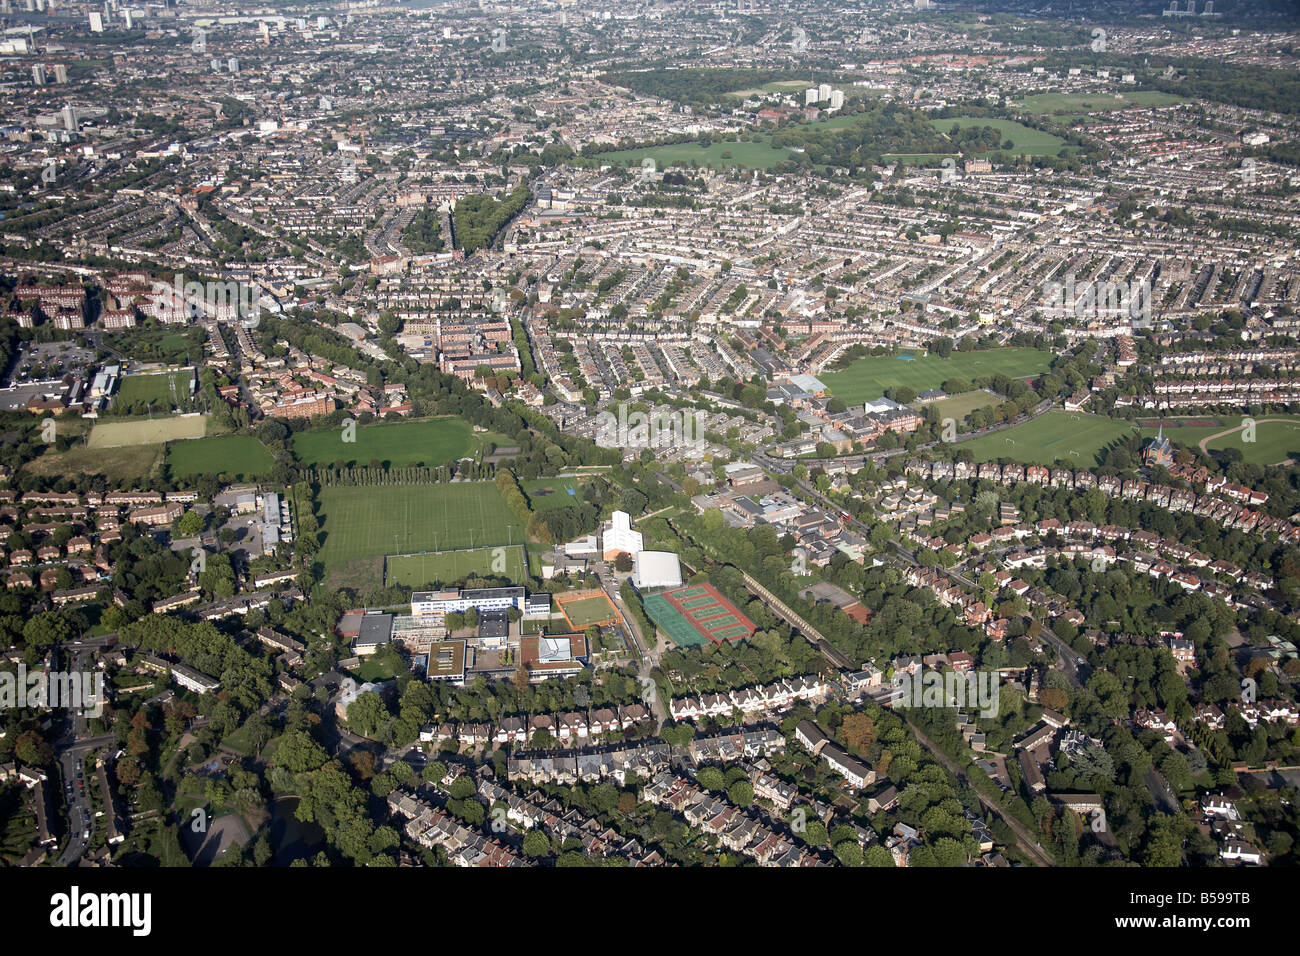 Aerial view north east of Dulwich High School playing fields tennis courts suburban houses Peckham Rye Common London SE22 SE15 Stock Photo